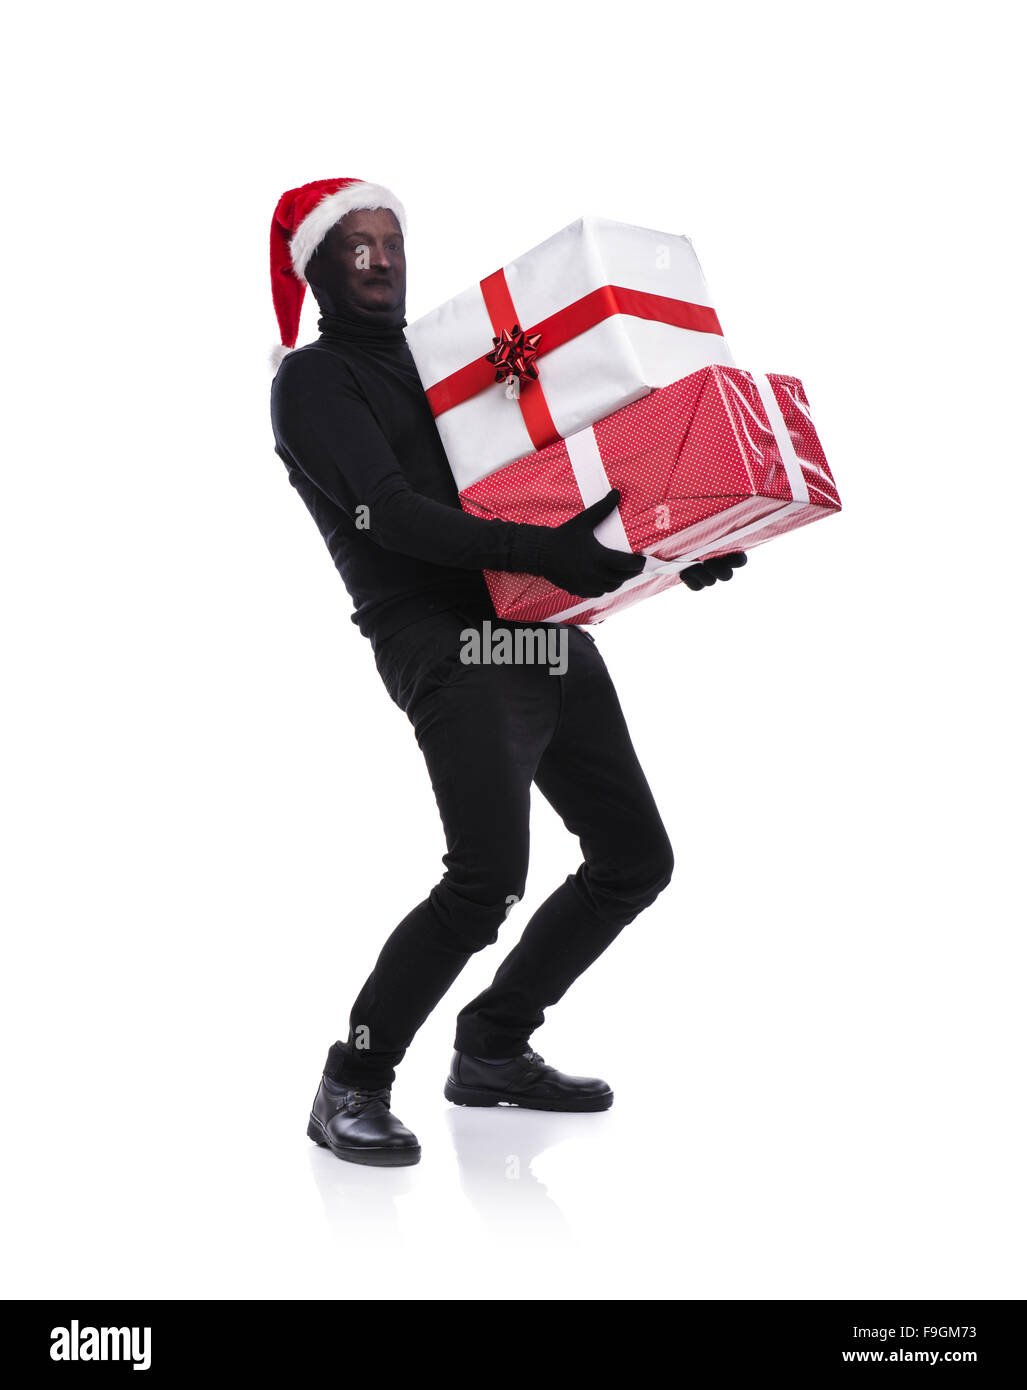 Thief in action carrying presents with balaclava on his face, dressed in black. Studio shot on white background. Stock Photo